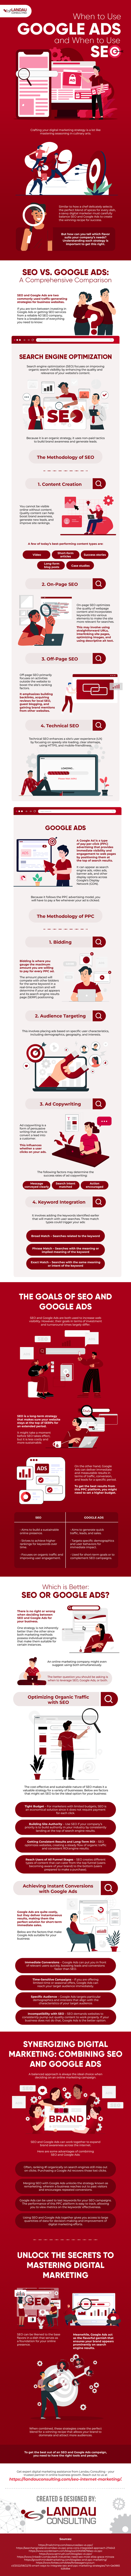 When to Use Google Ads and When to Use SEO Infographic 08